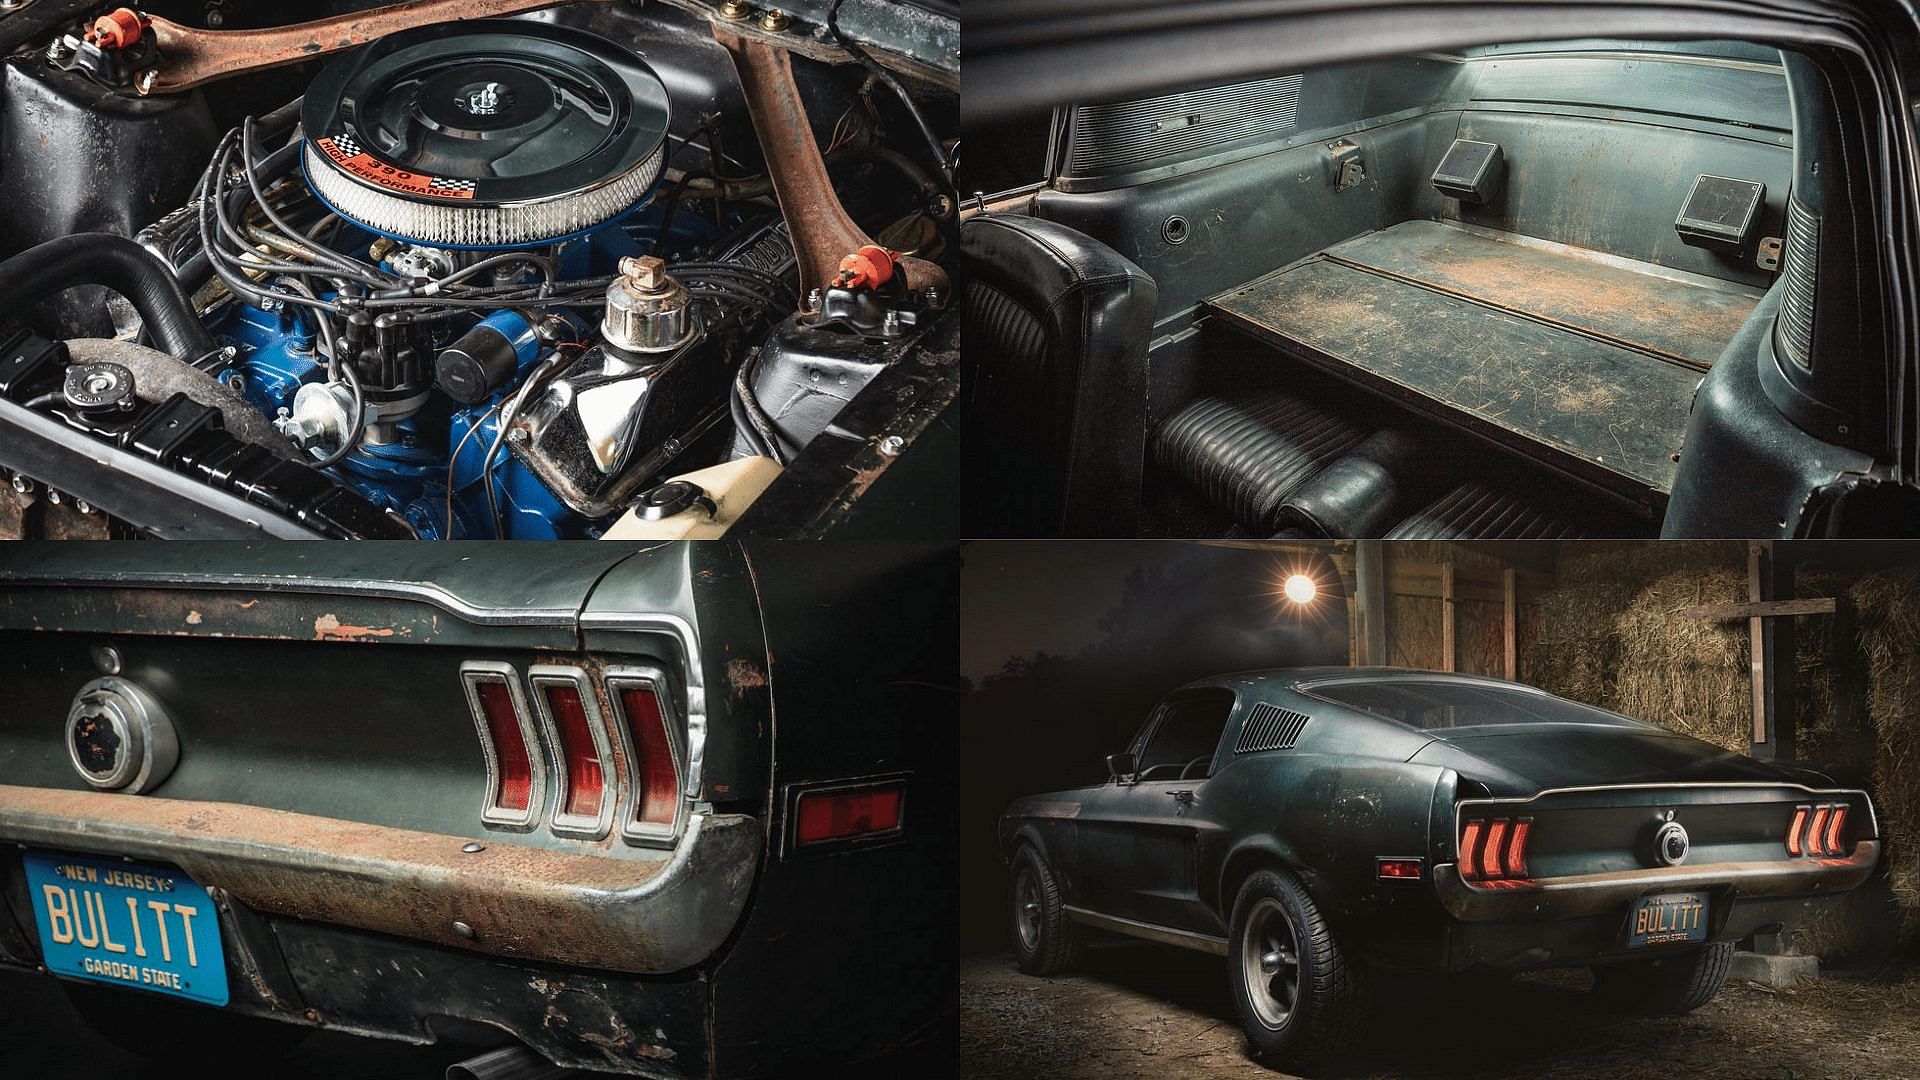 1967 Ford Bullitt Mustang engine, taillights, cargo space, rear view